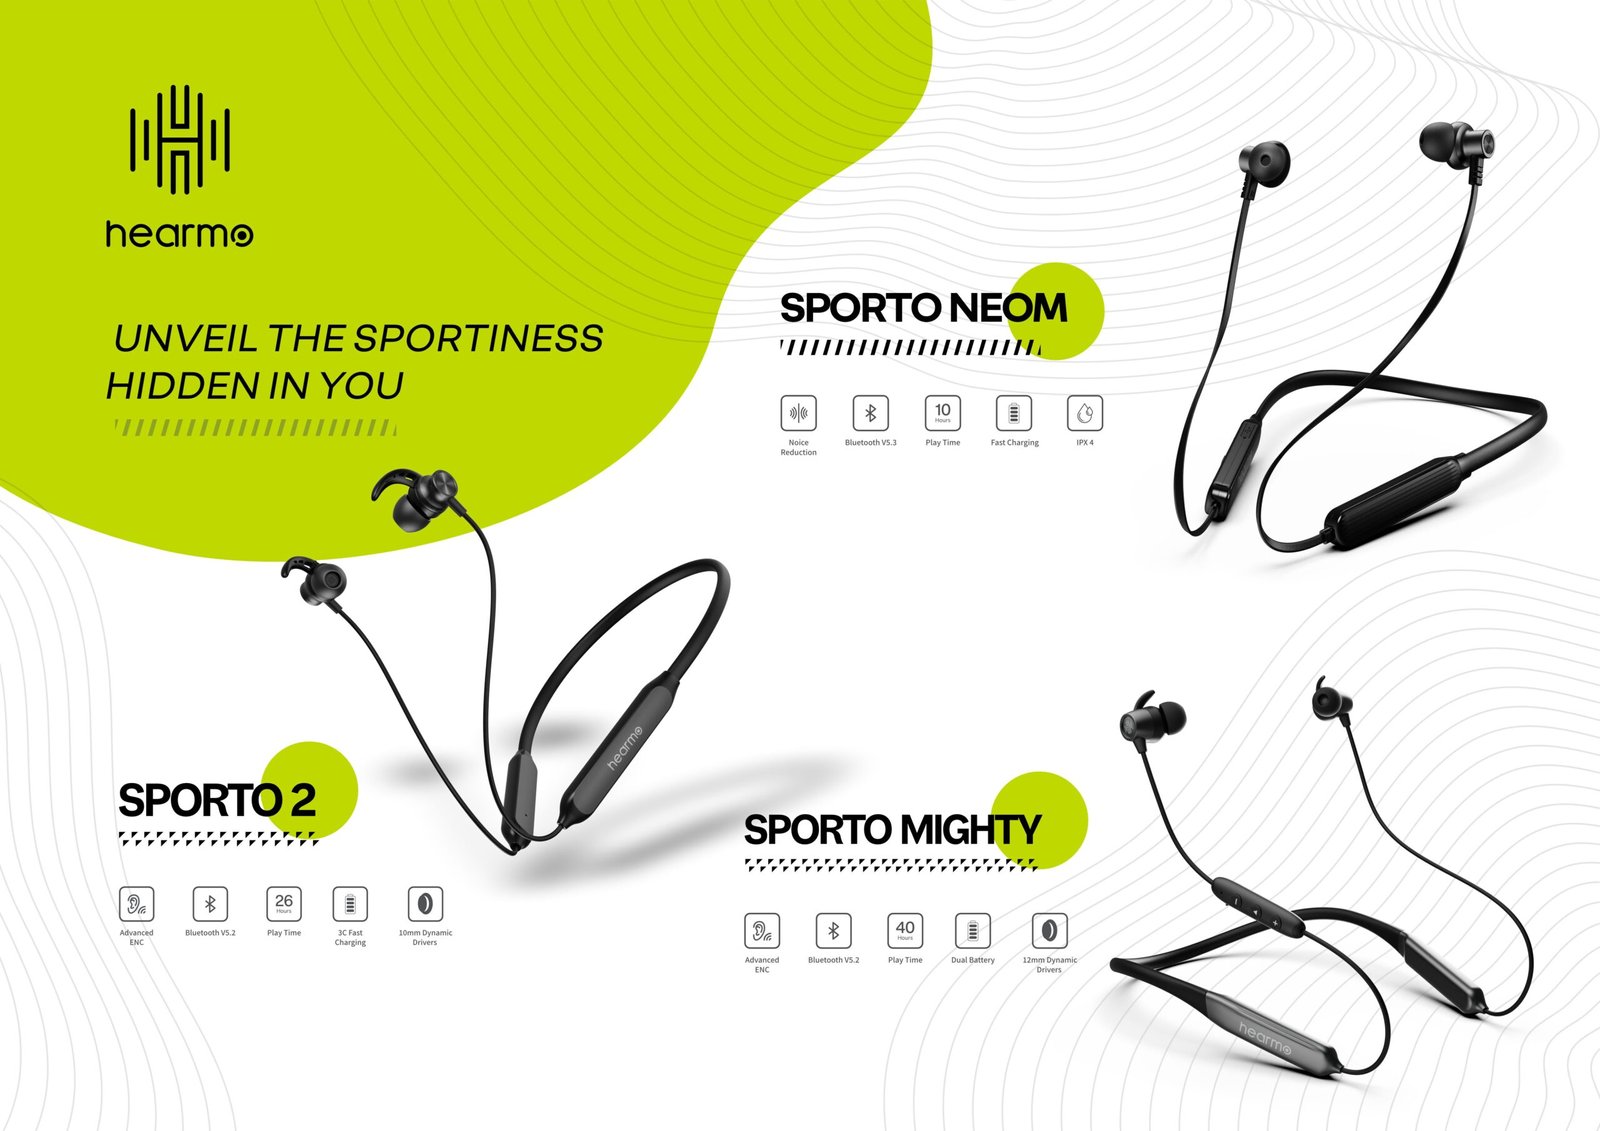 Hearmo launches a range of affordable Sporto series Neckbands starting INR 799/-